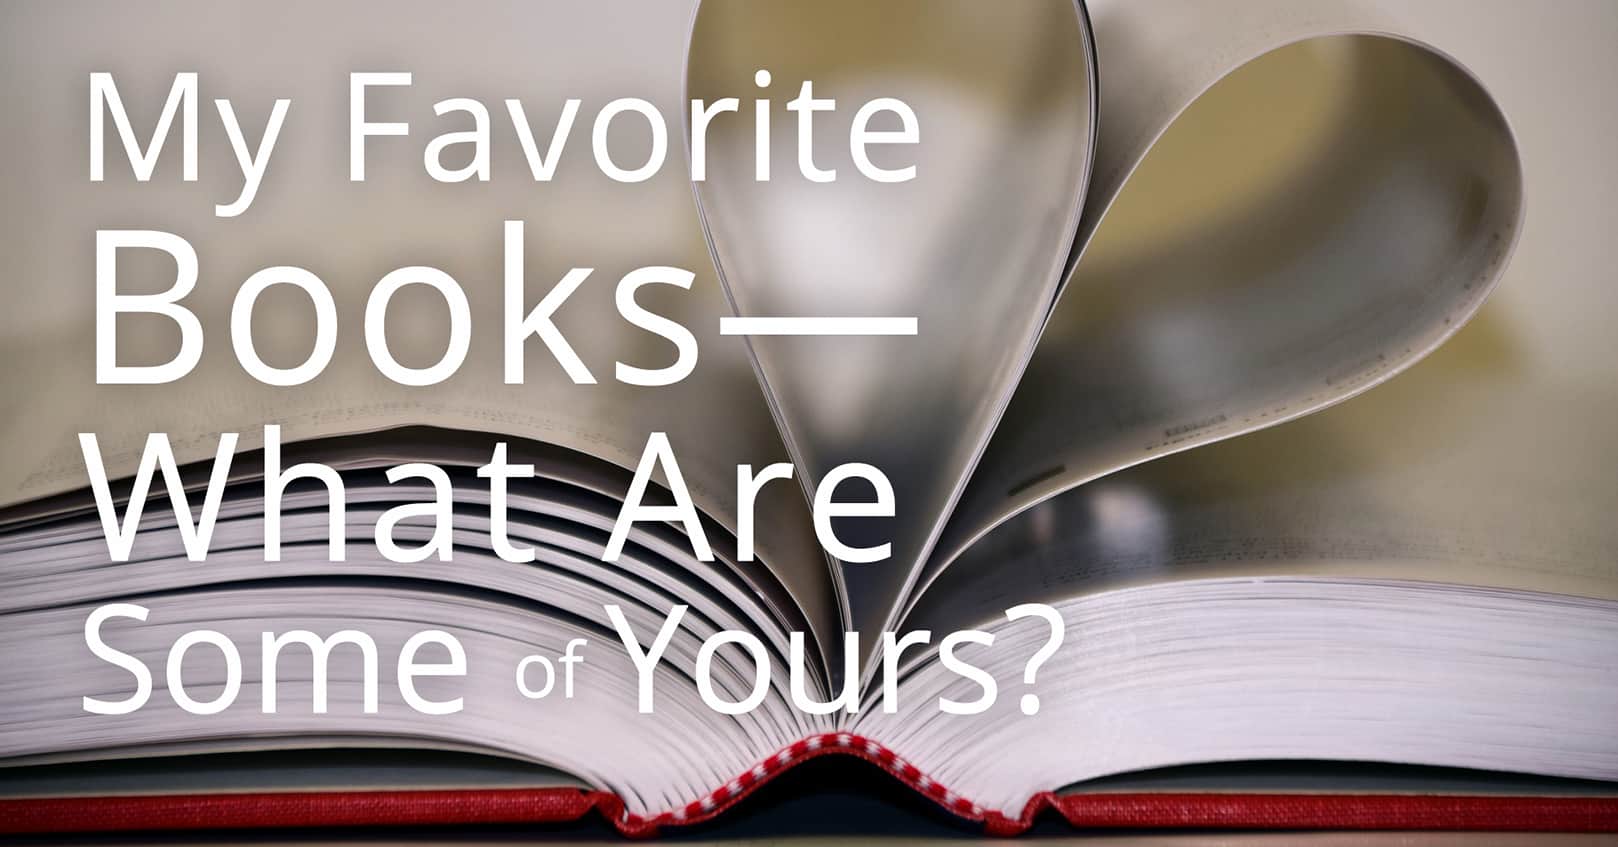 My Favorite Books--What Are Some of Yours?